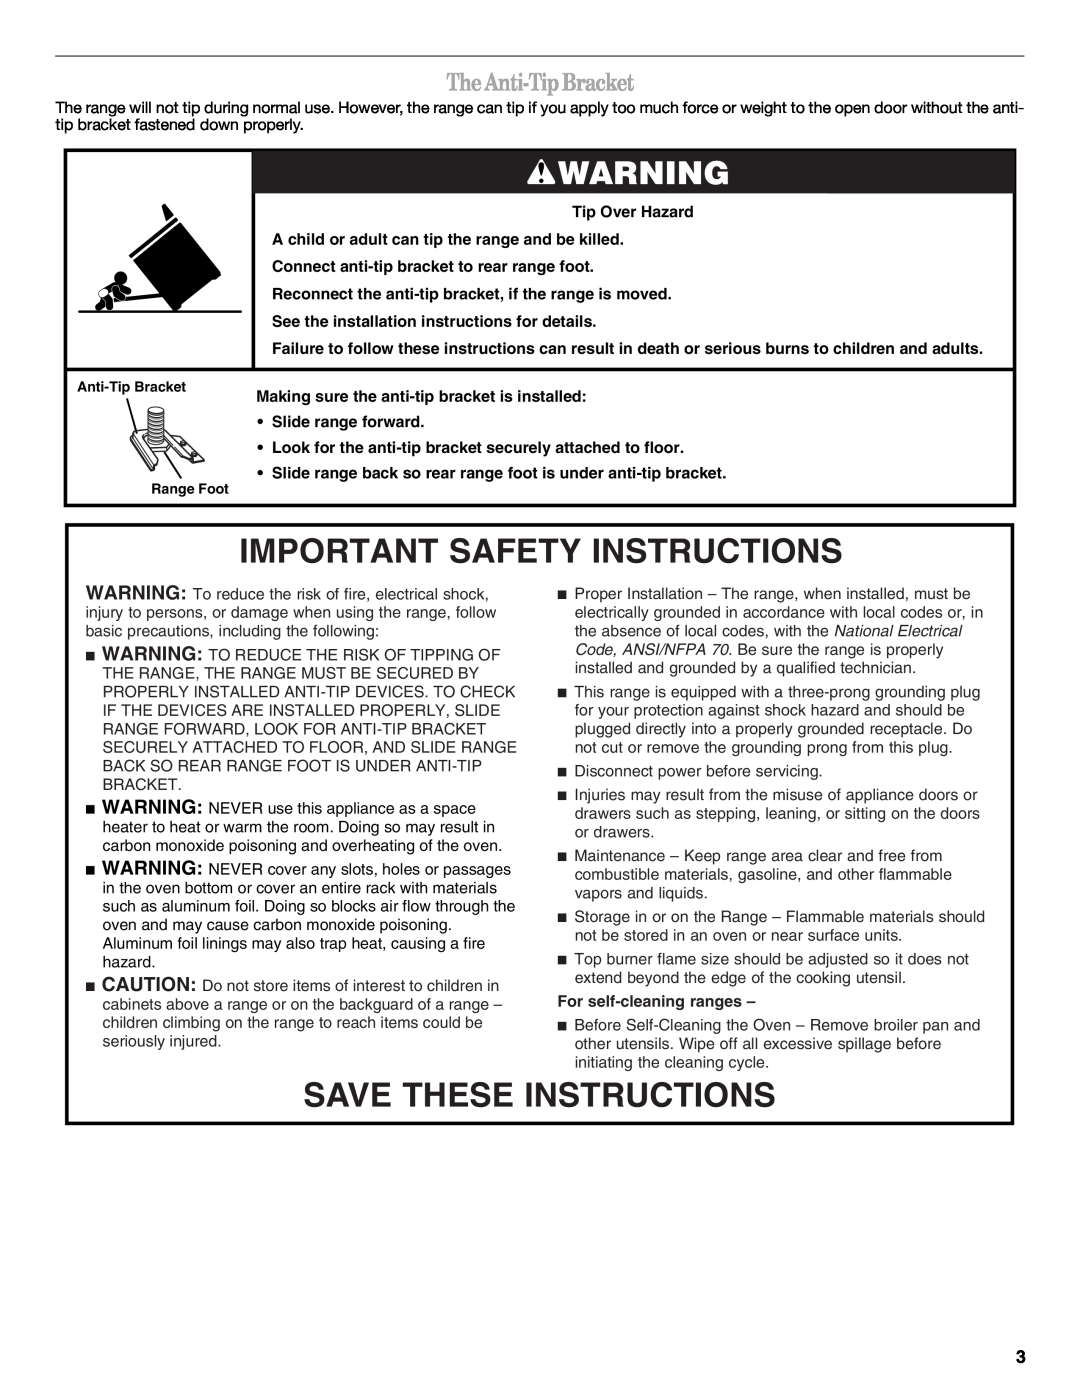 Whirlpool GFG471LVS The Anti-Tip Bracket, Important Safety Instructions, Save These Instructions, For self-cleaning ranges 